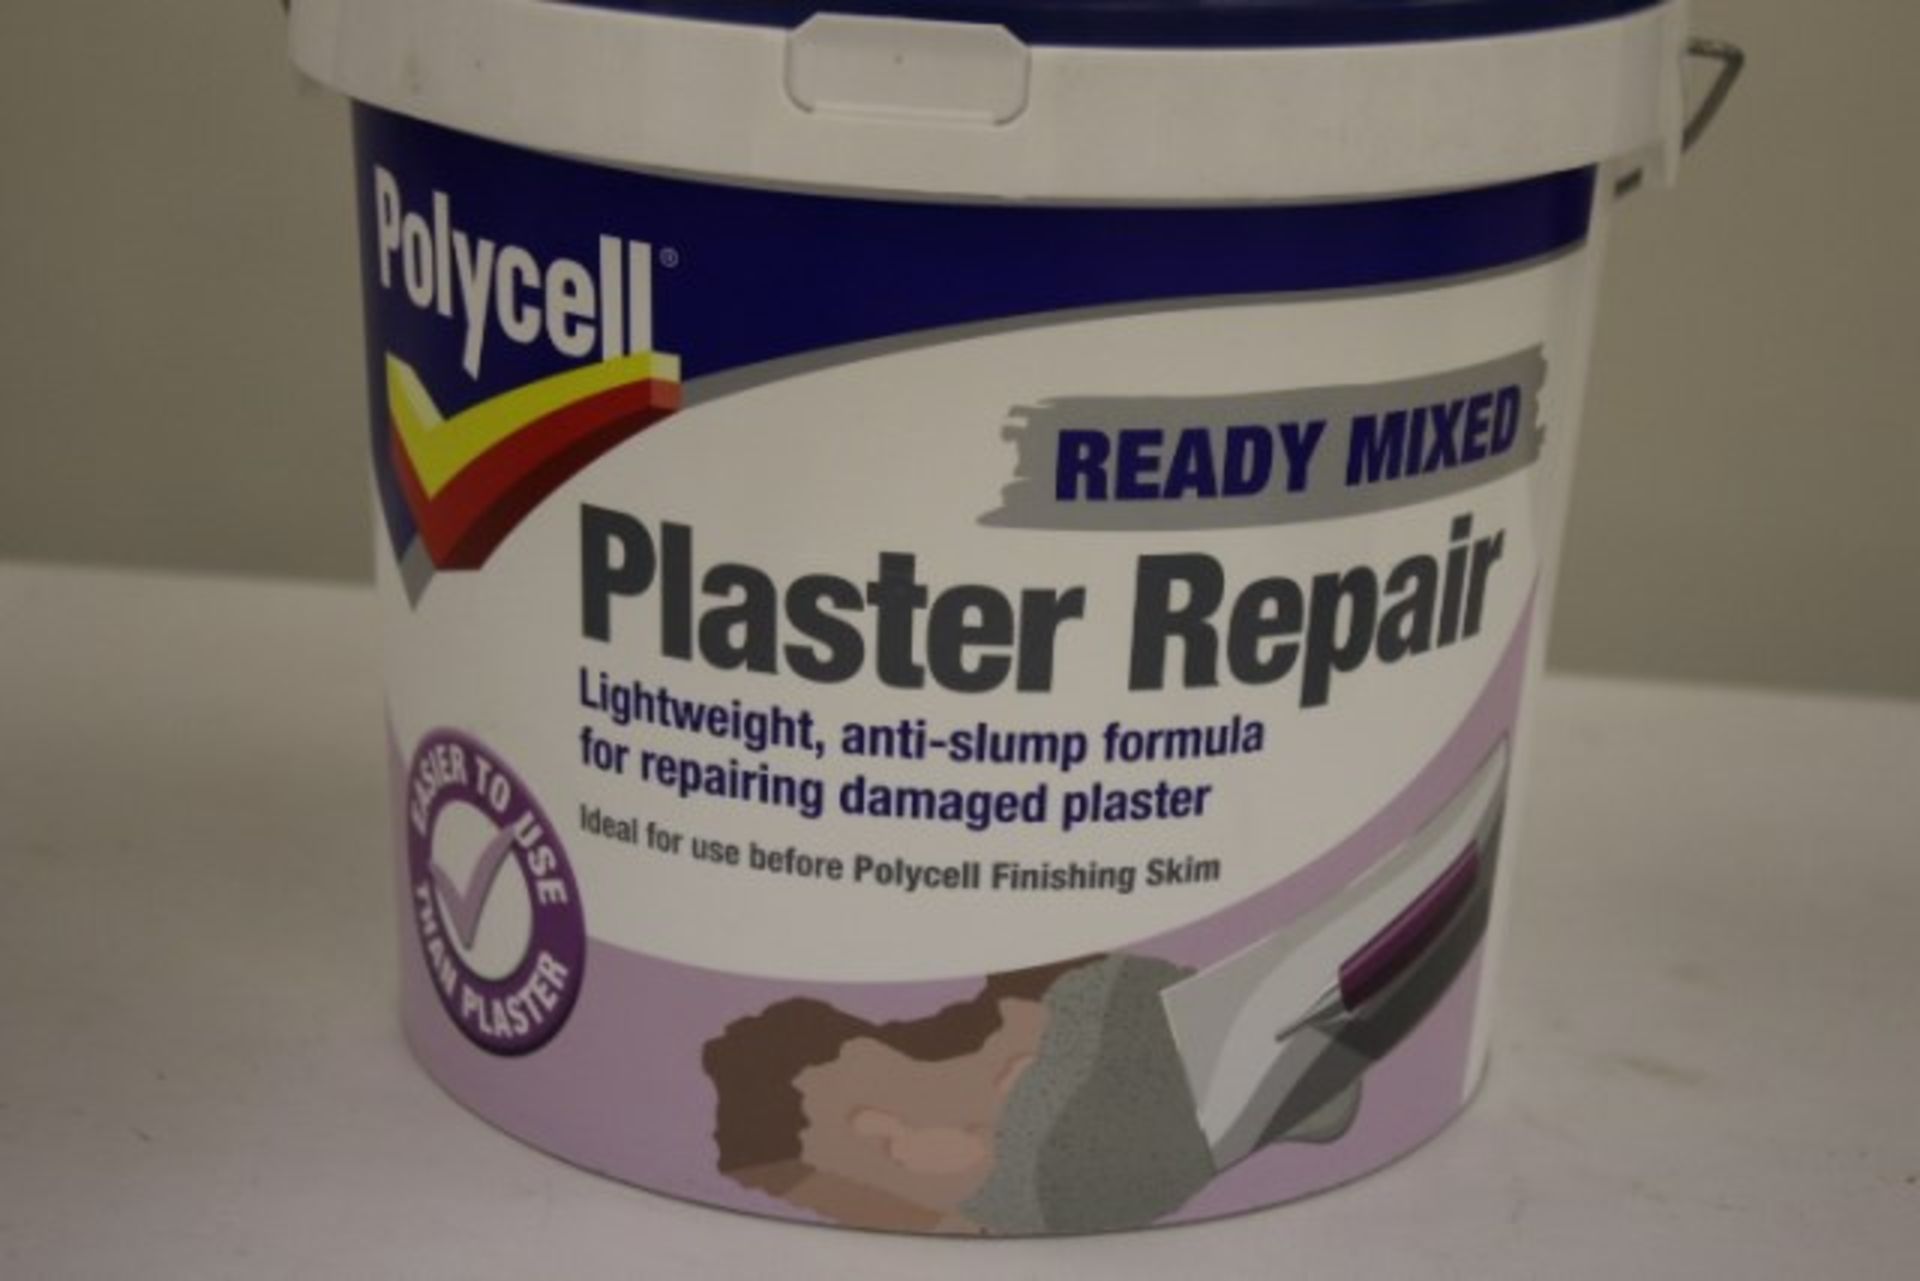 V Grade A Polycell Ready Mixed Plaster Repair 6 litre - Image 3 of 3